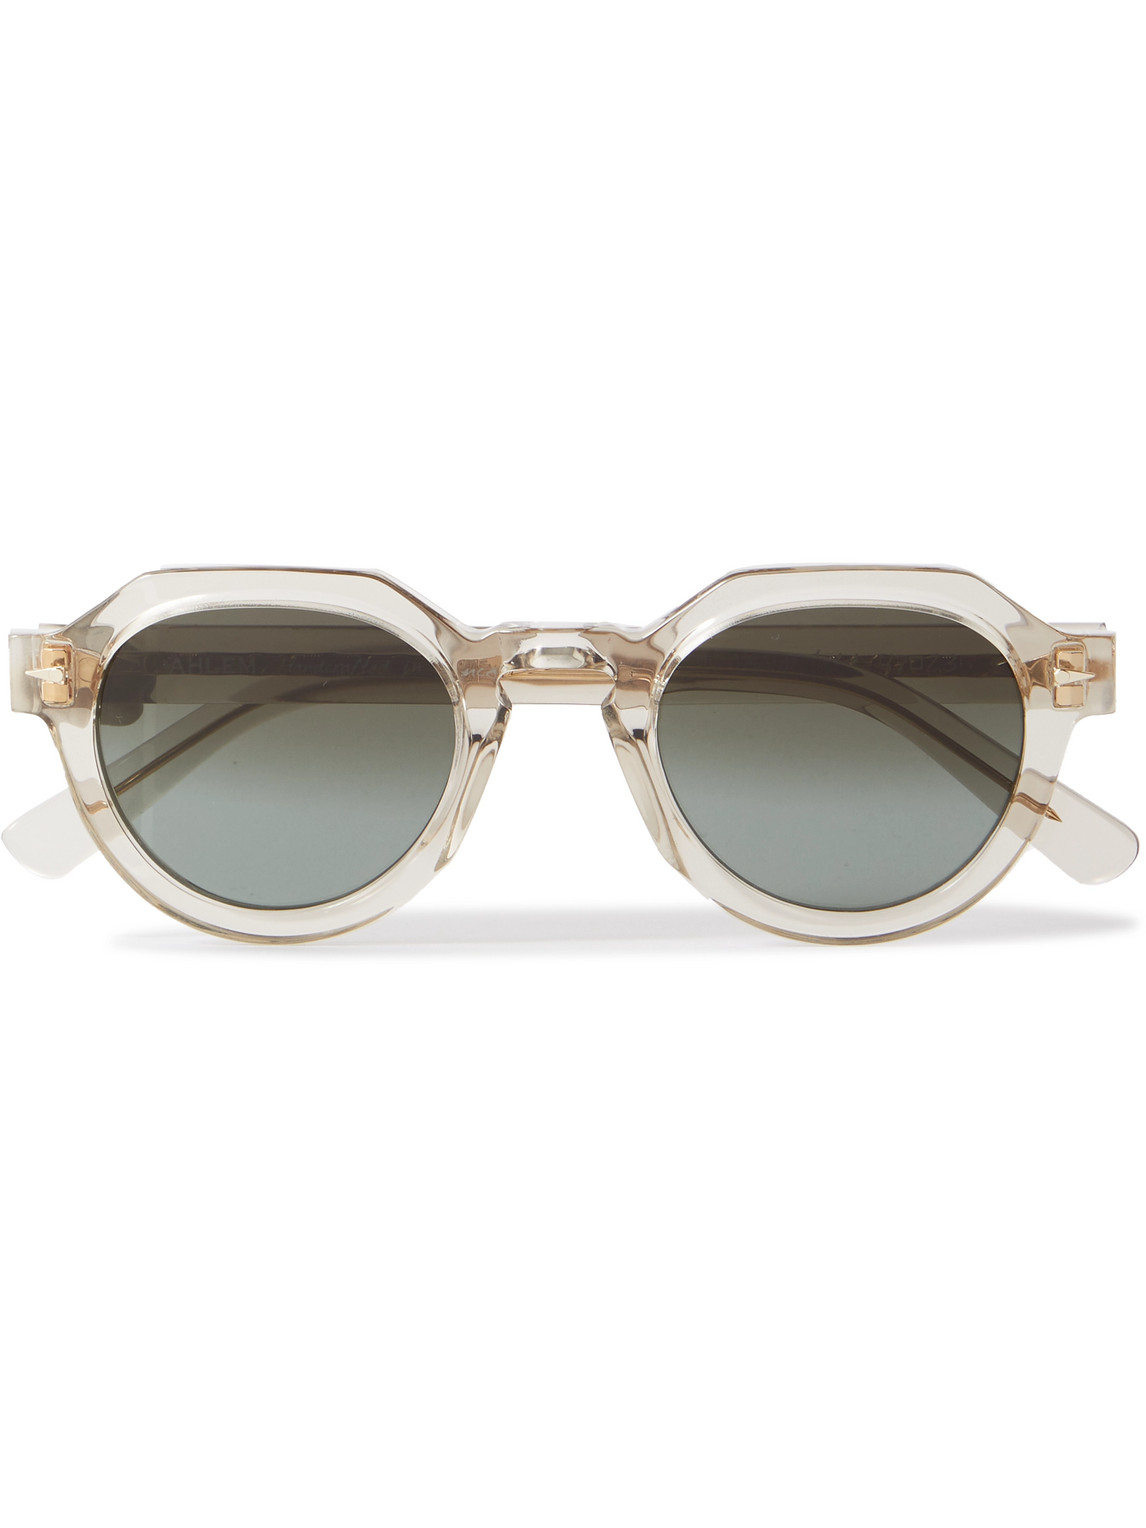 Ahlem Grenelle Round-frame Acetate Sunglasses In Gray